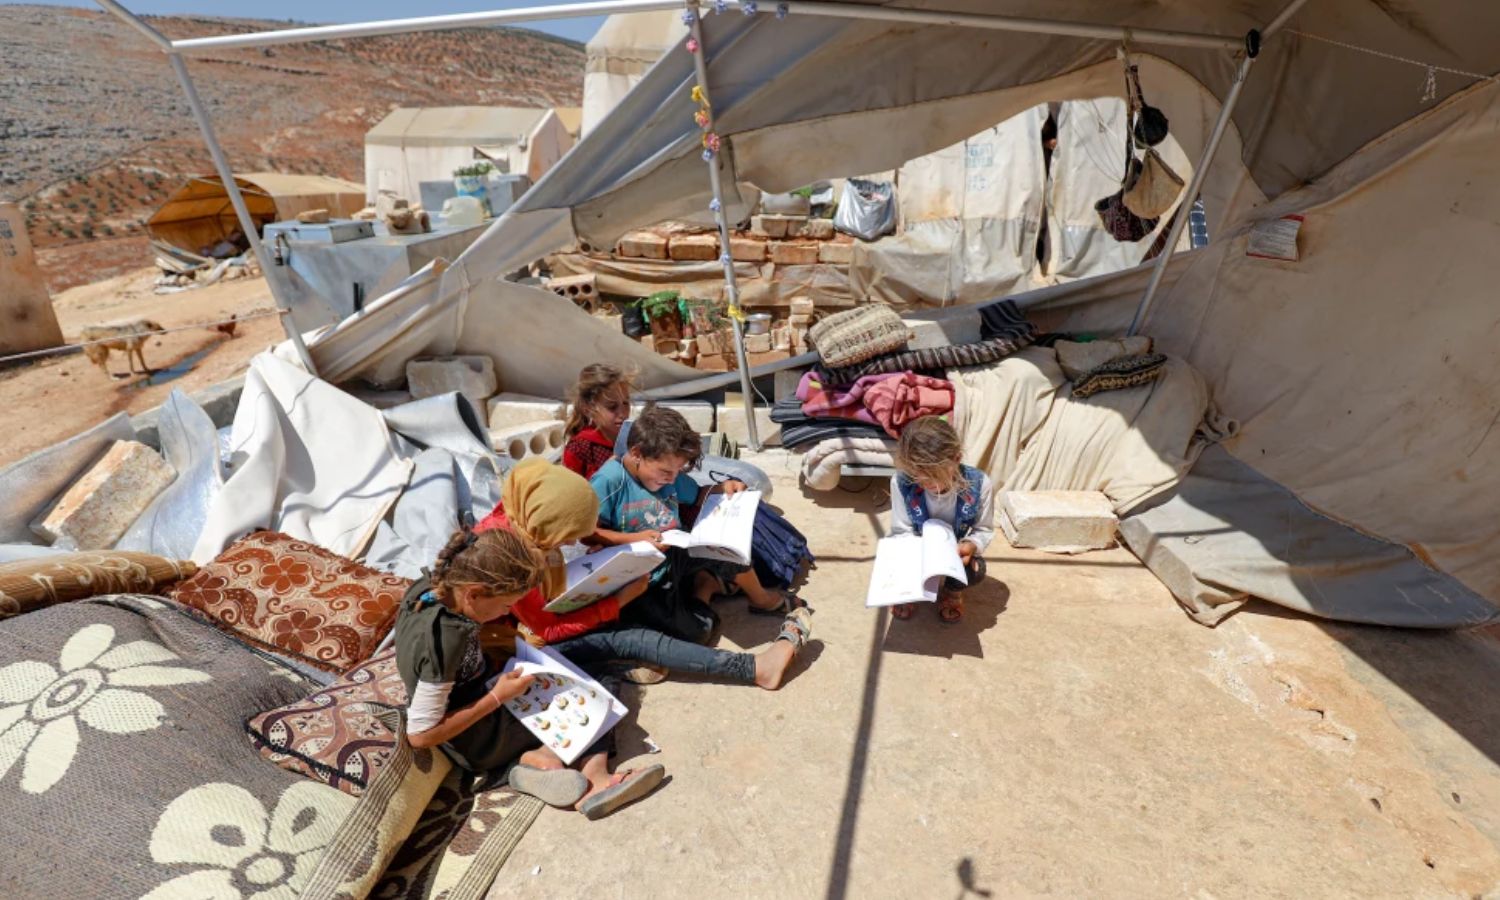 Storms and winds damaged dozens of tents in al-Sheikh camp in Idlib - 7 August 2022 (OCHA)